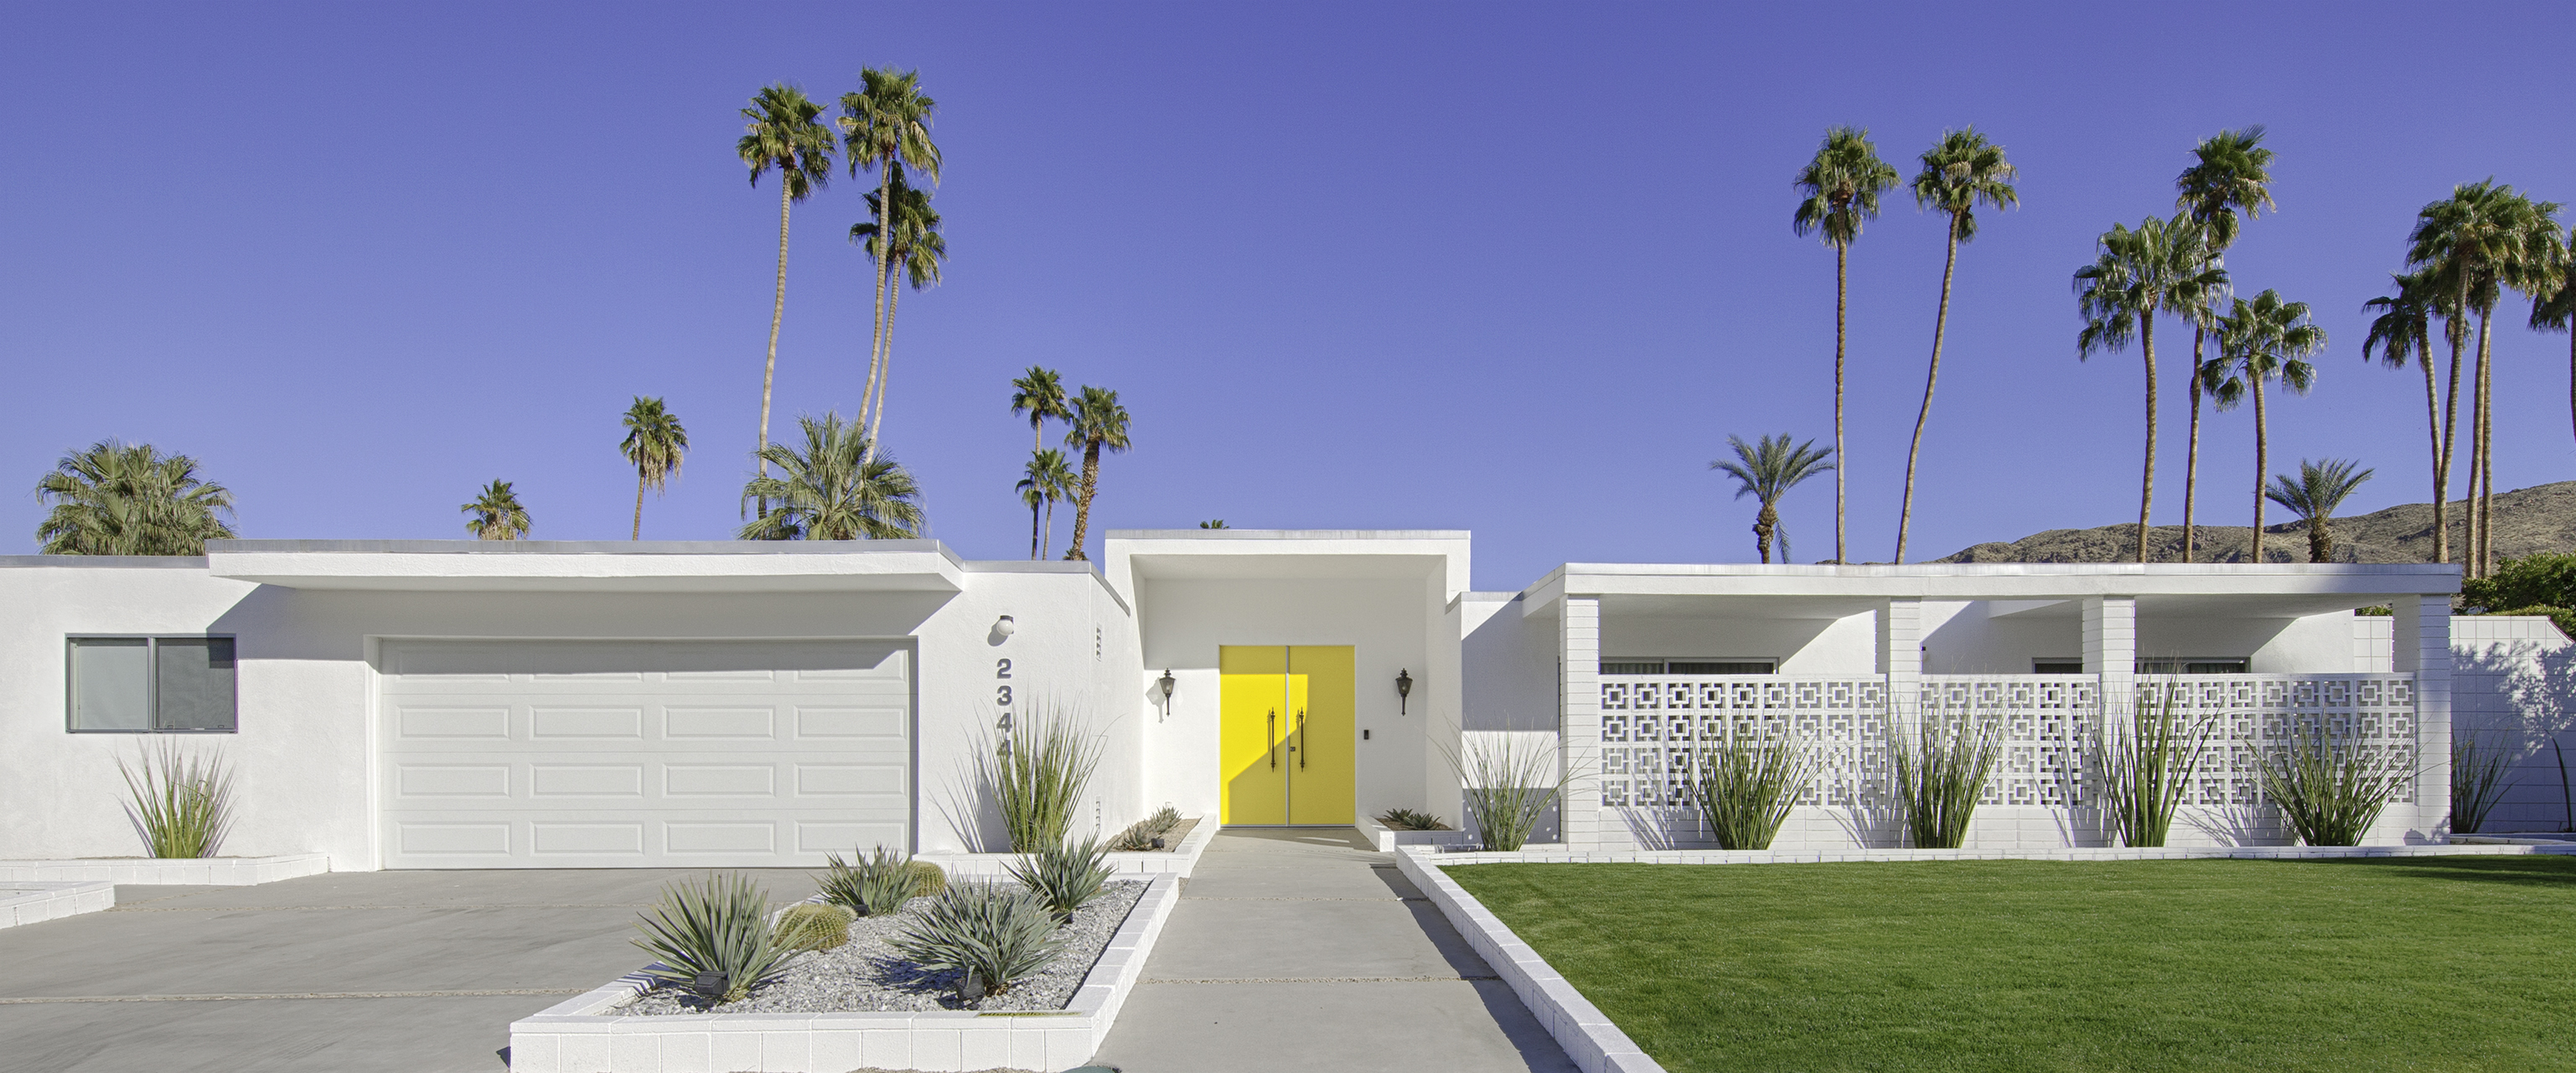 palm springs real estate, coachella valley real estate